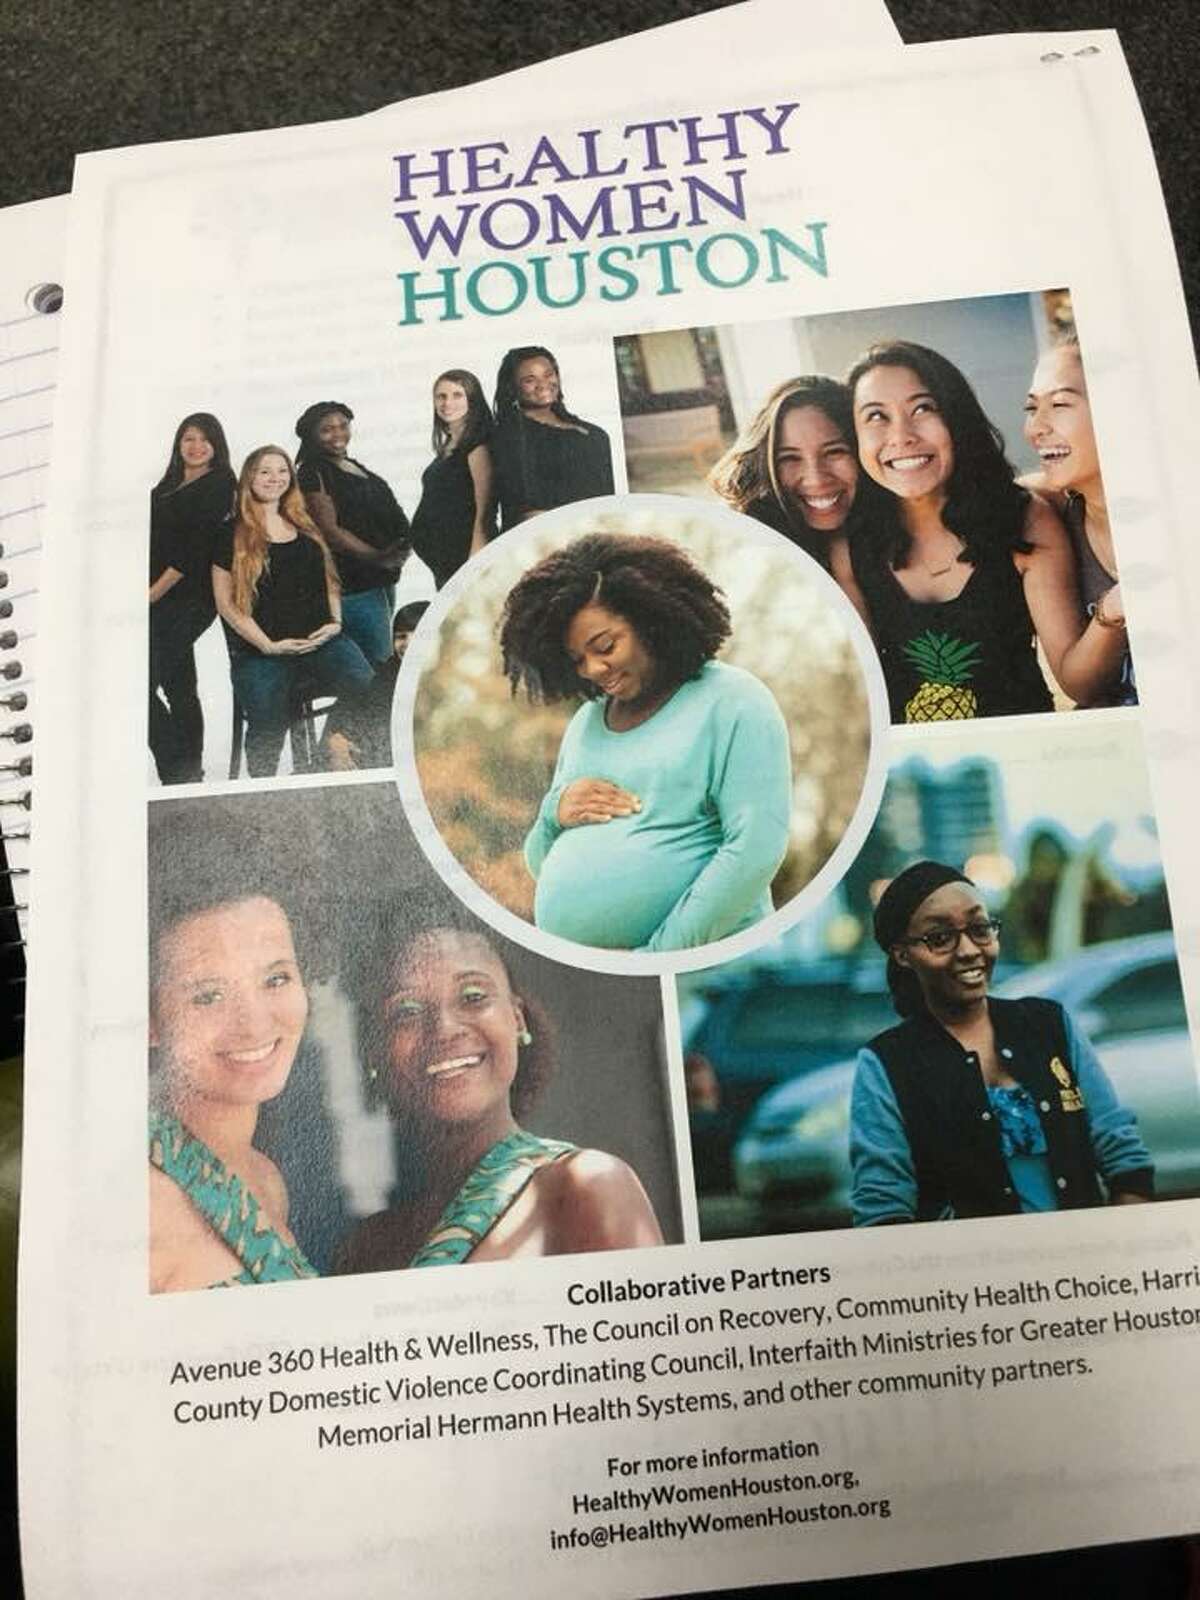 A coalition of health organizations launched Healthy Women Houston on Friday, Feb. 22, 2019. The initiative's aim is to combat maternal mortality and morbidity in the Third Ward and Sunnyside, areas in Houston where women die after giving birth at much higher rates than compared to other parts of Harris County.